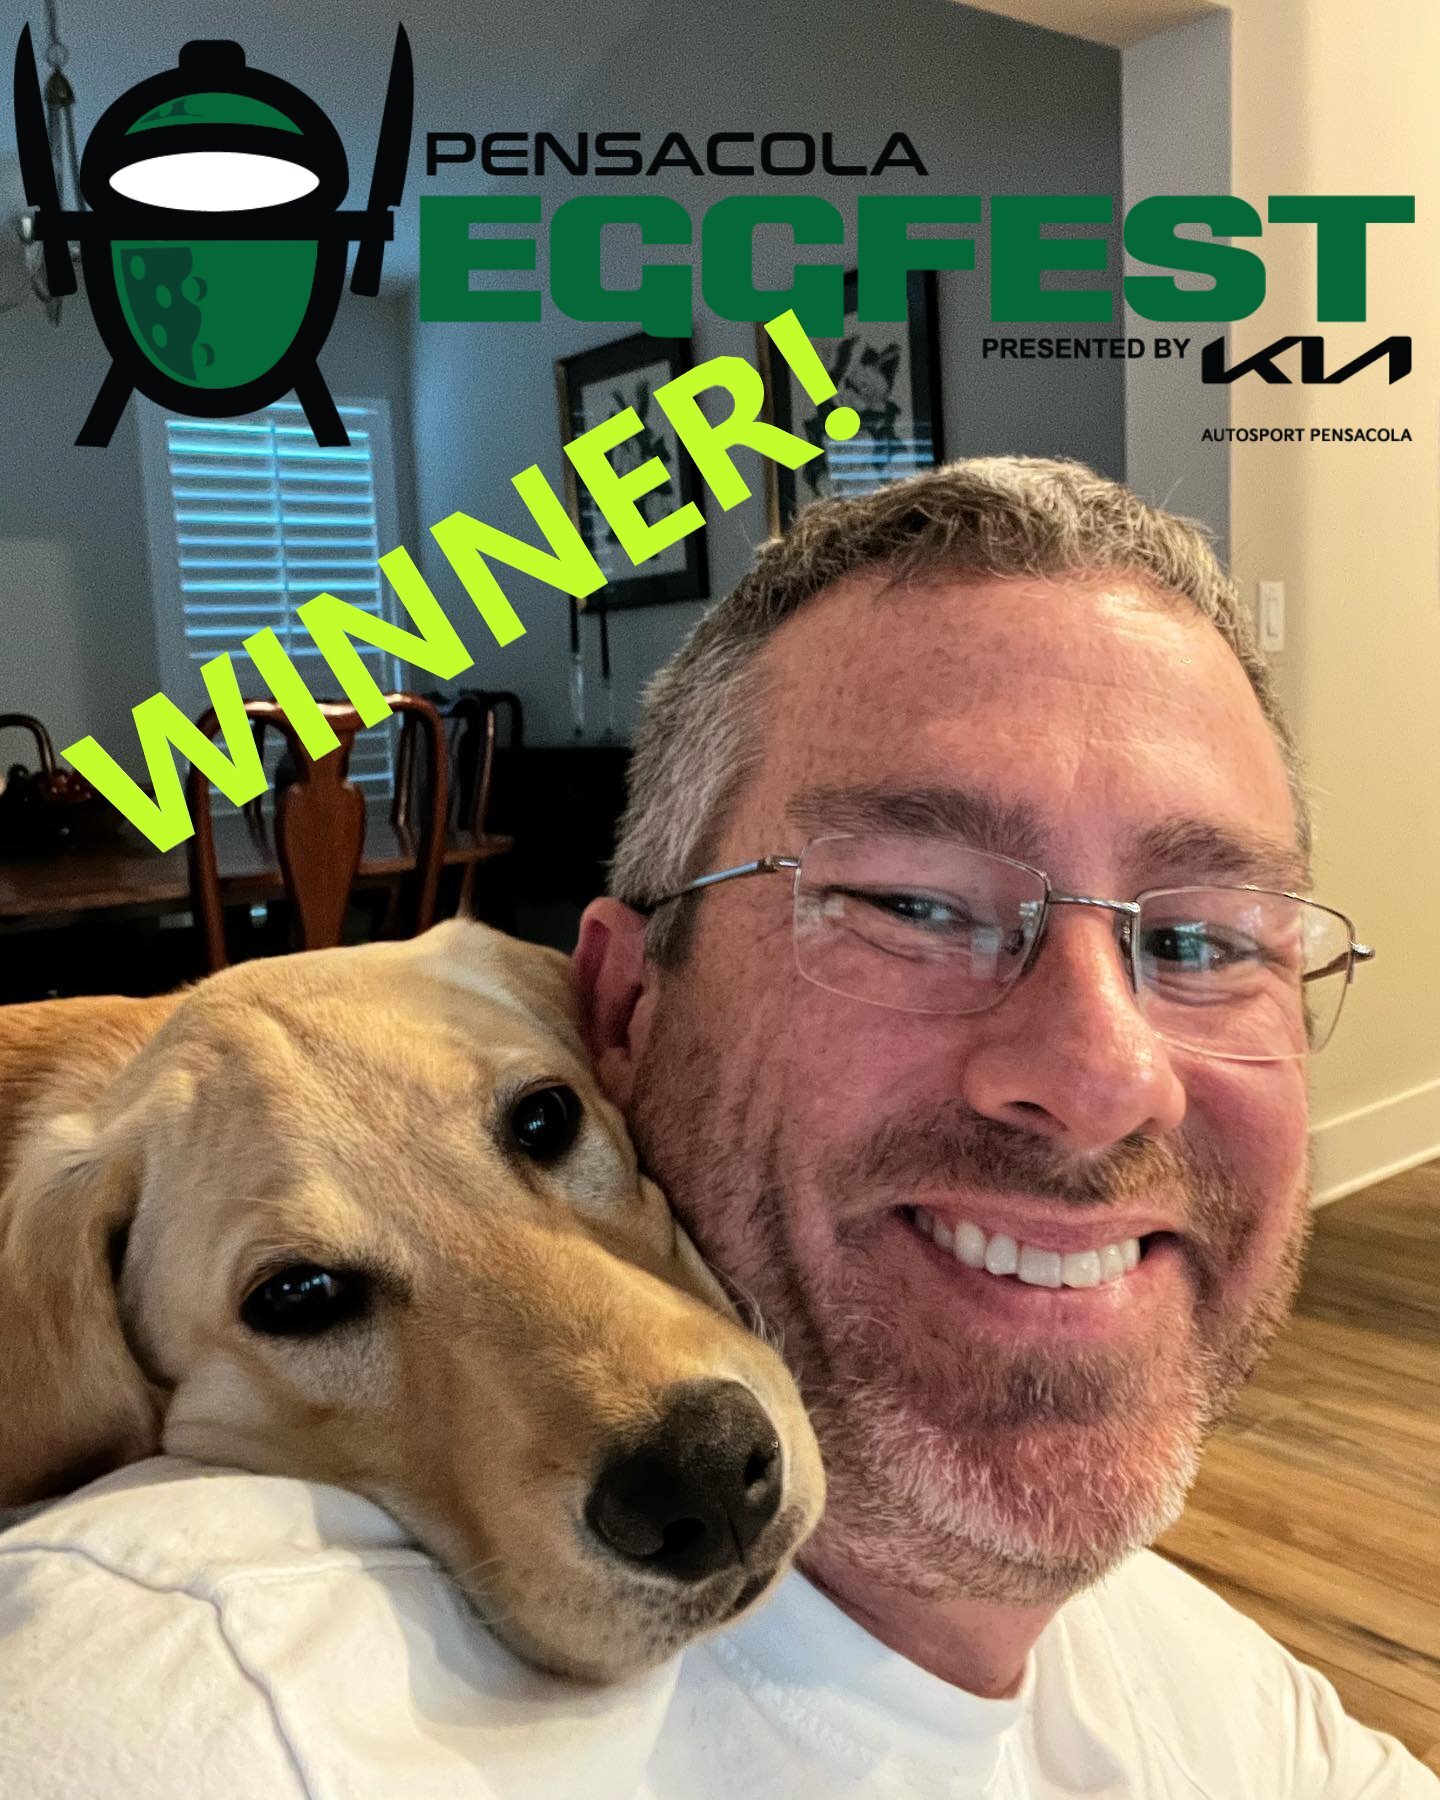 There he is, folks, the happiest man in all these parts. Frankly, he was pretty happy prior to this announcement, but this doesn't hurt either. Jamie Byers (right) is the winner of four tickets to @pensacola_eggfest this Sunday at Community Maritime 